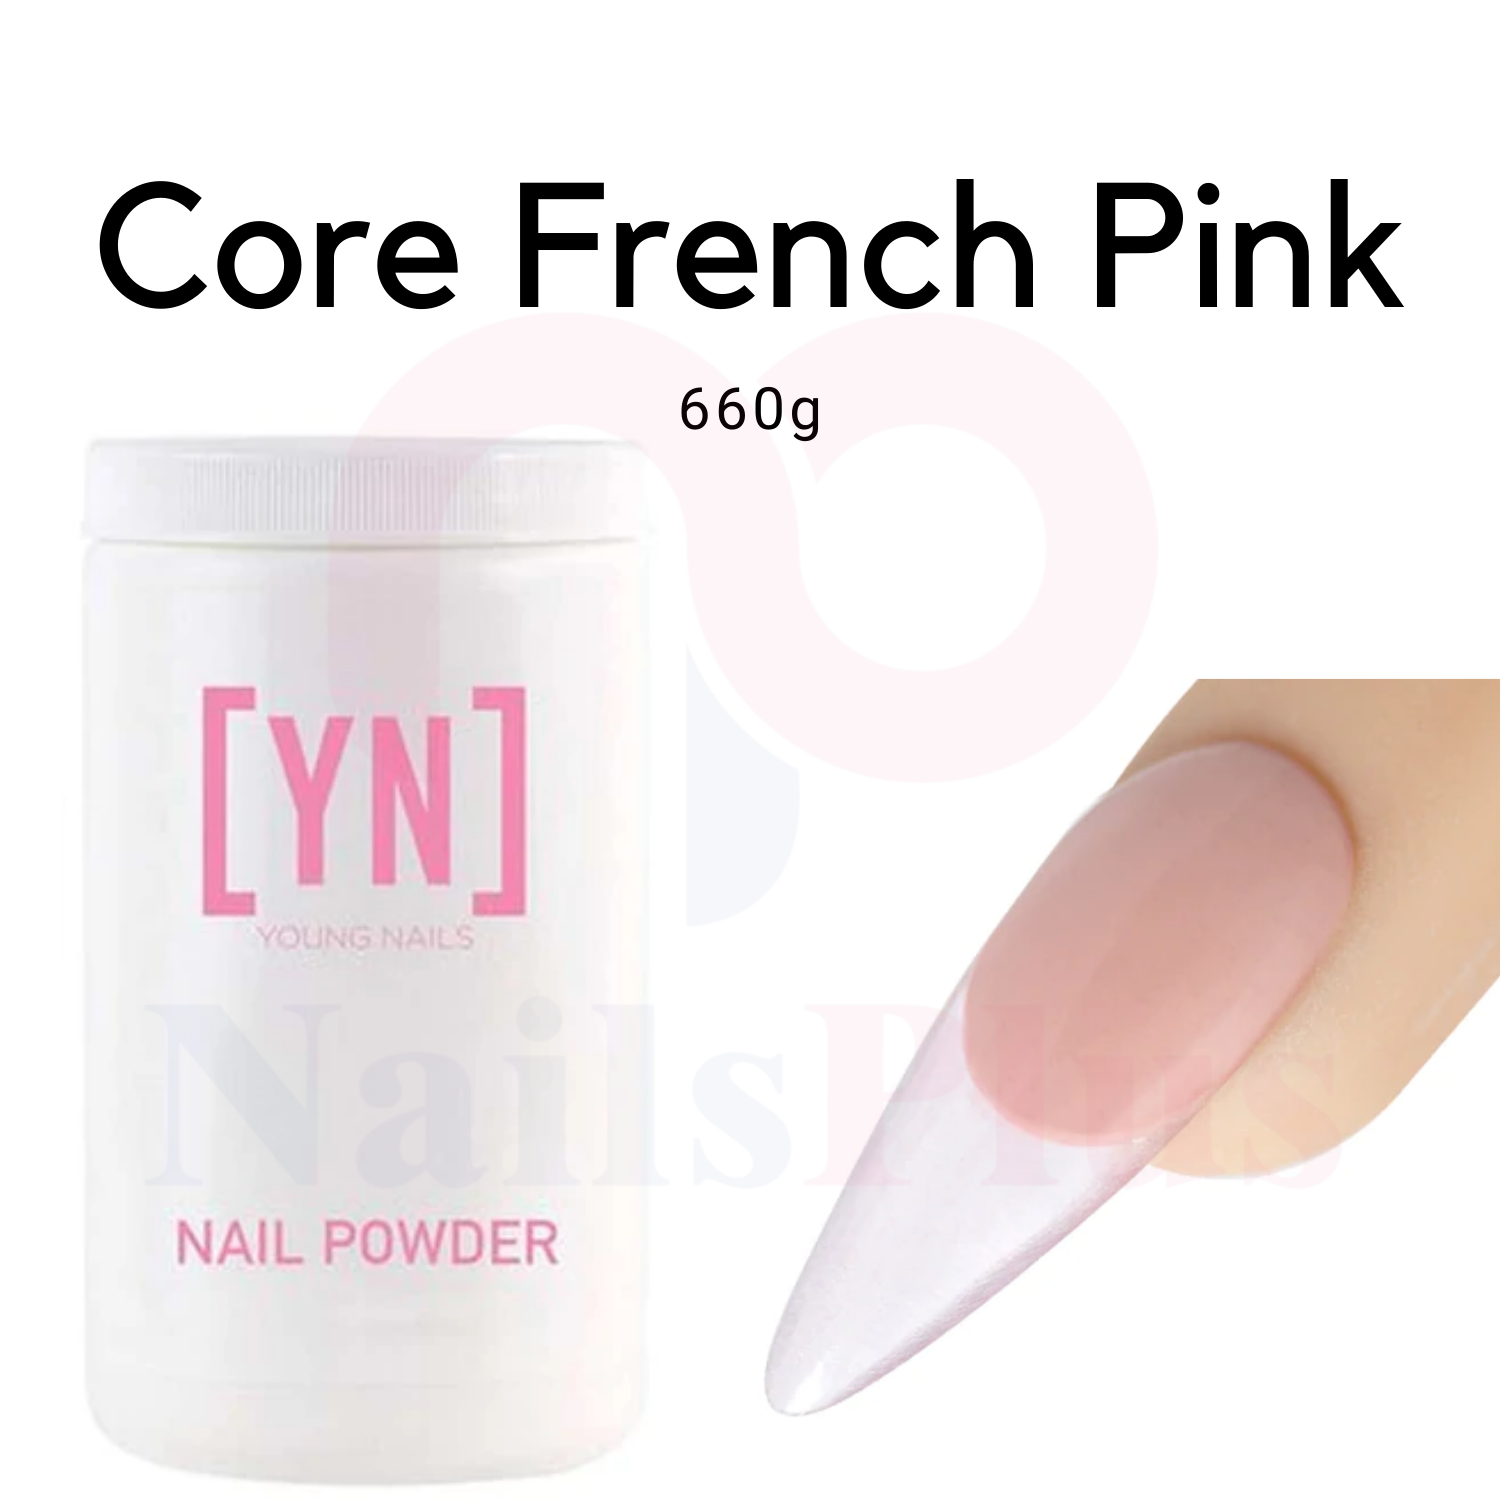 Core French Pink